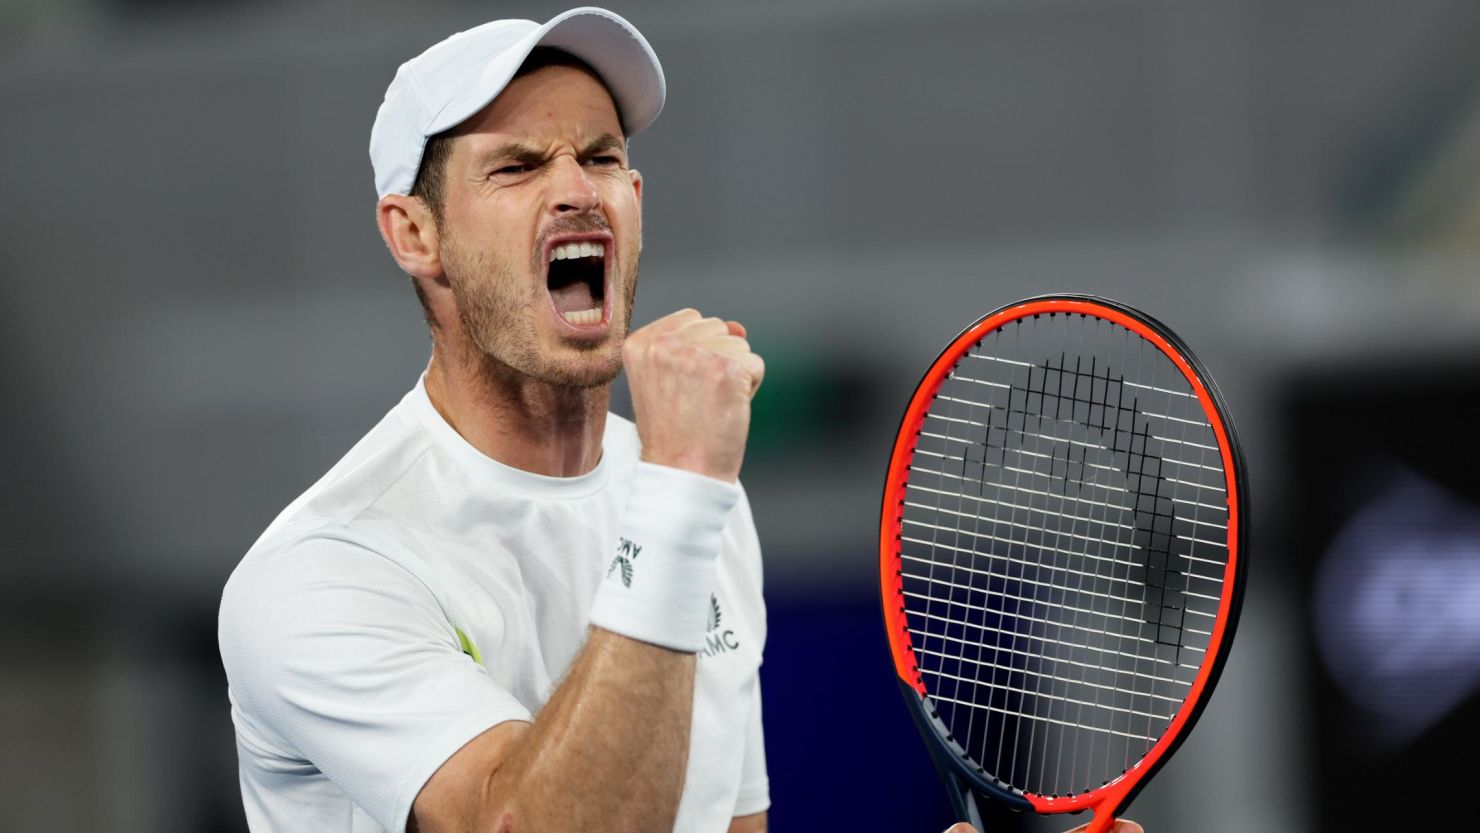 Andy Murray produced yet another stunning performance at the Australian Open.